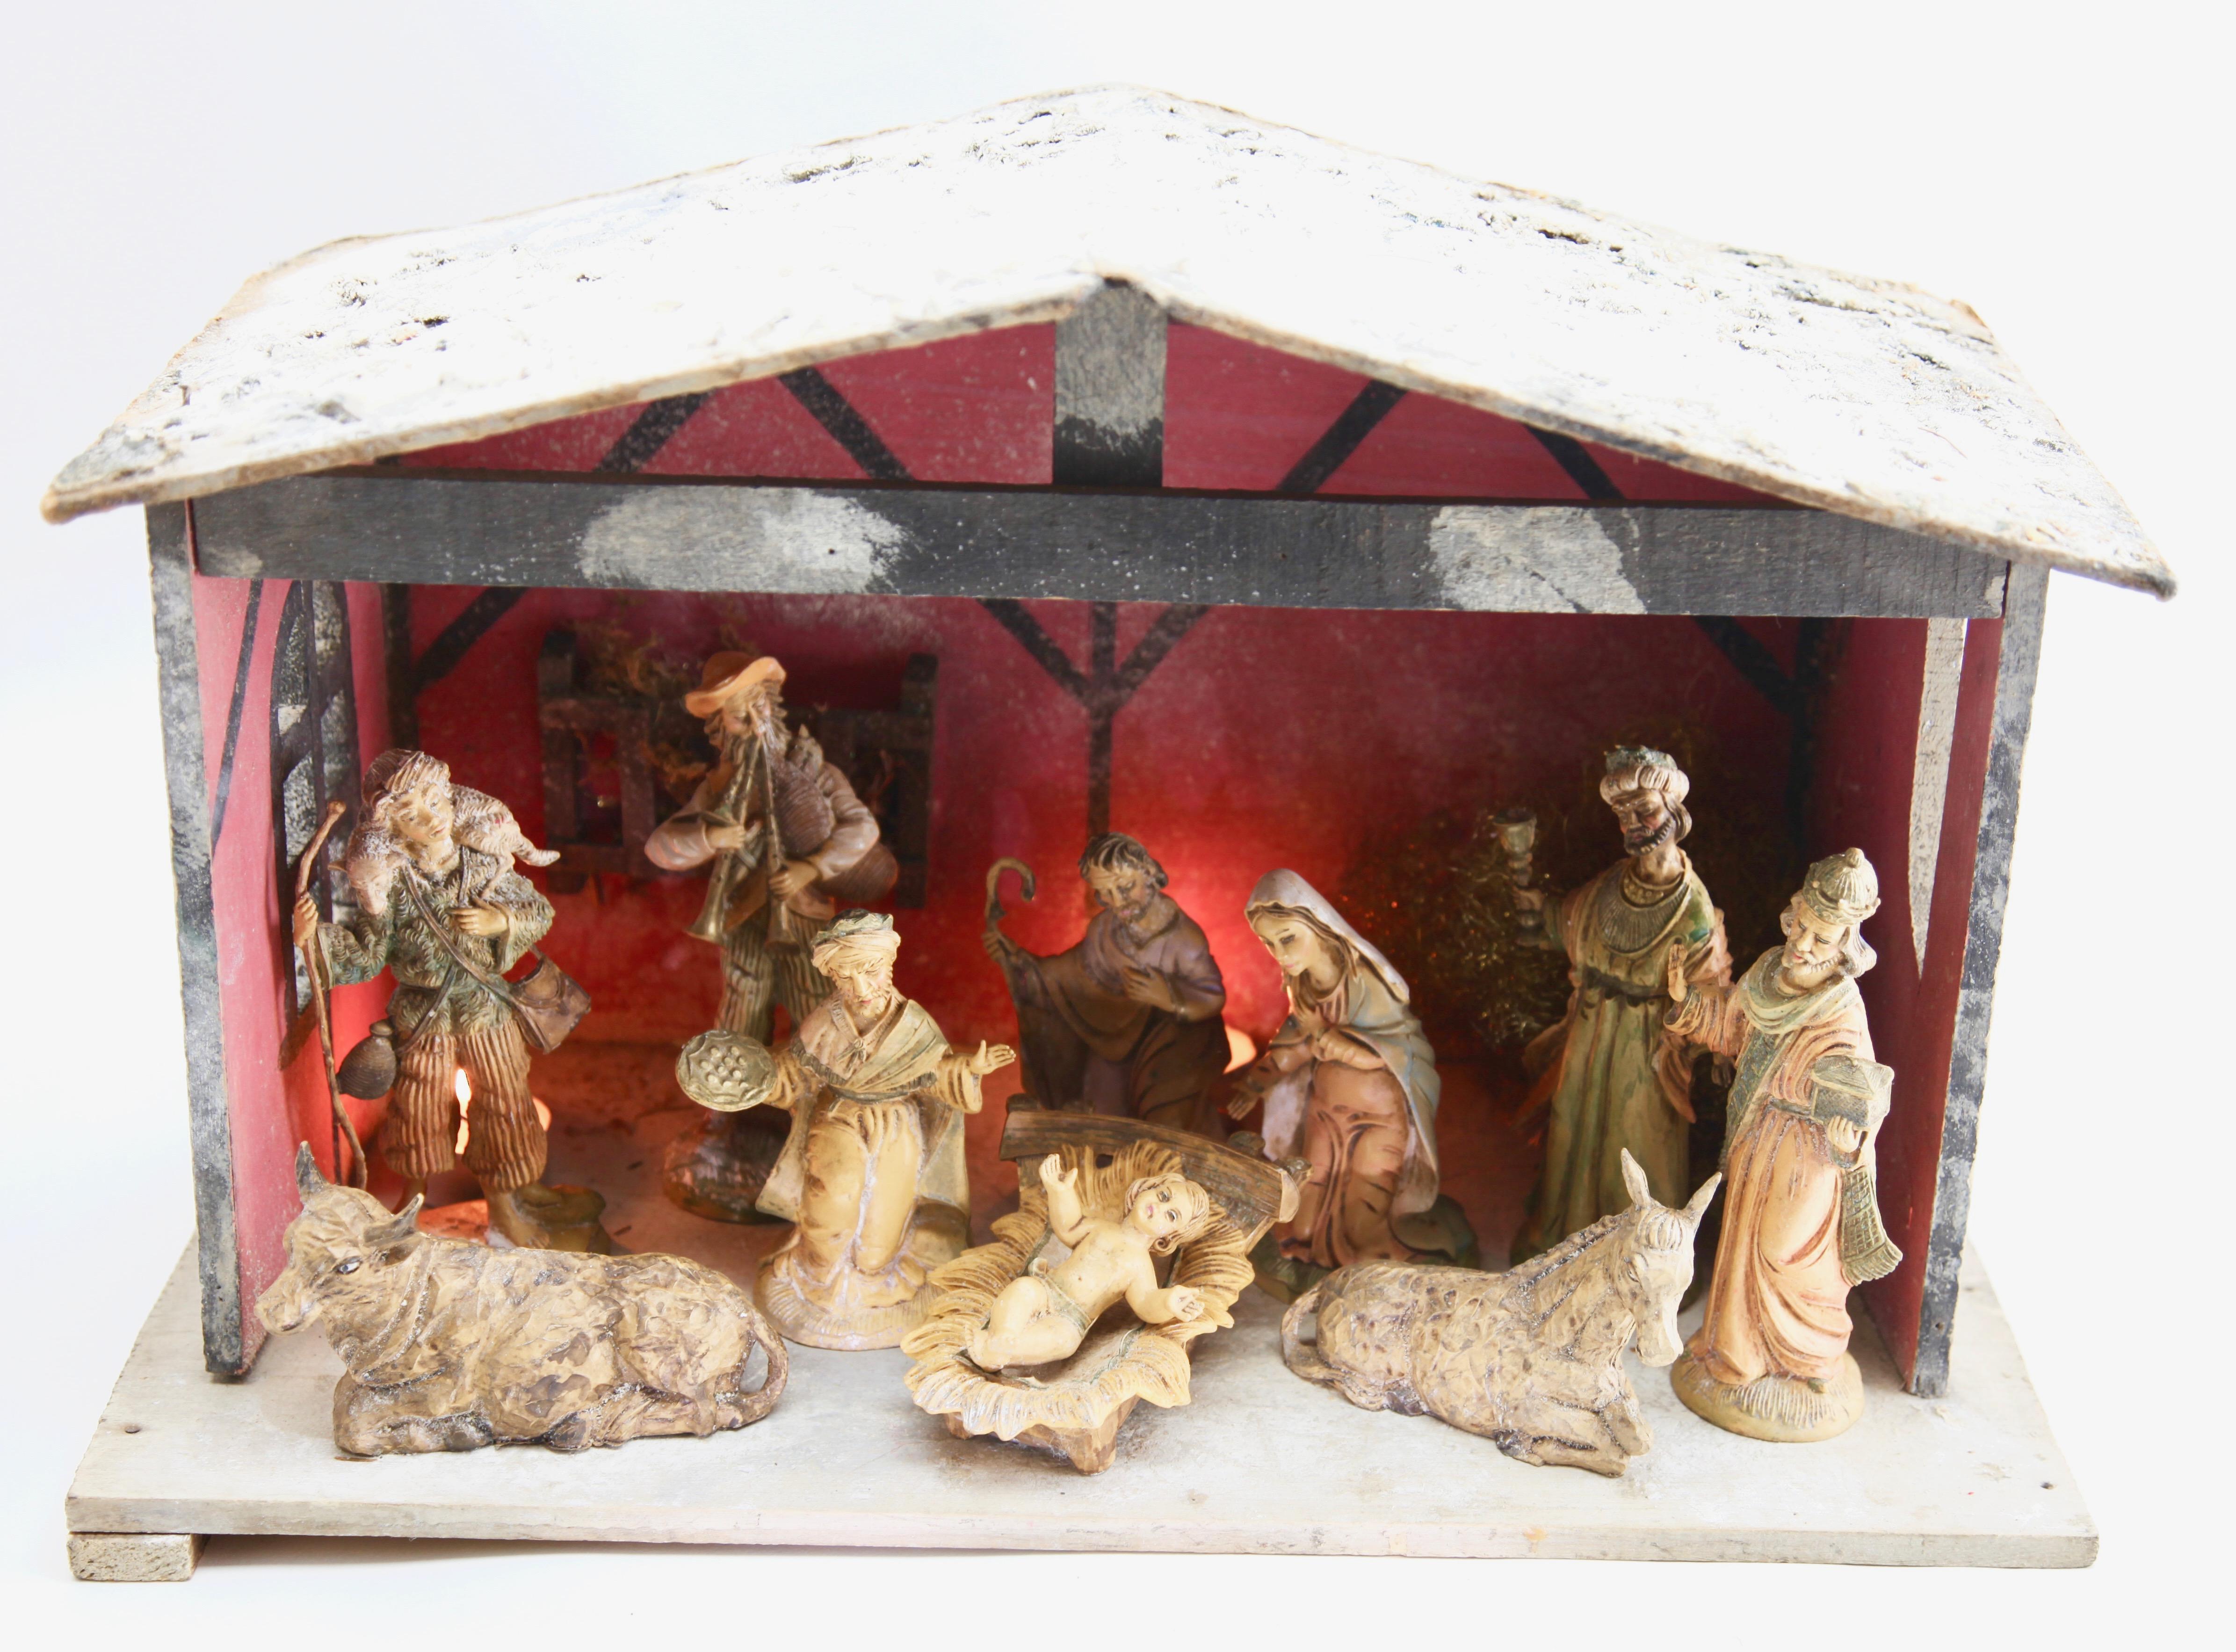 Christmas nativity scene of highly detailed hand painted figurines including Mary and Joseph, three kings, shepherds, Christ-figure in a manger with an ox and an ass. 10 pieces in total. As background, a handcrafted wooden stabile.
Charming